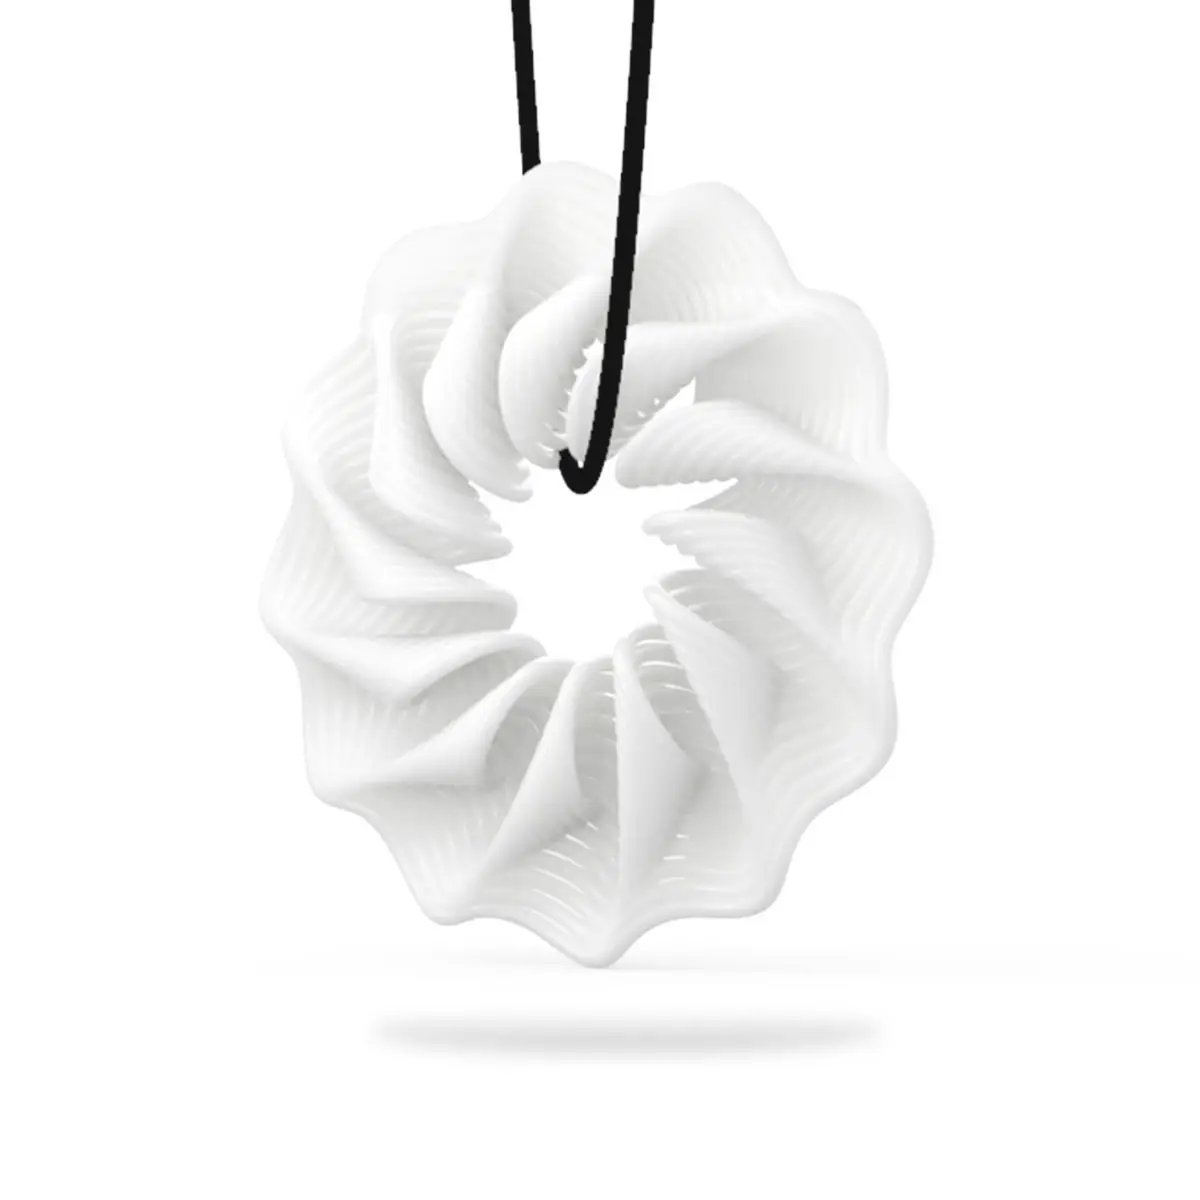 Tooarts Tomfeel 3D Printed Jewelry Rhythm Elegant Modeling Pendant Necklace Accessories | Дом и сад